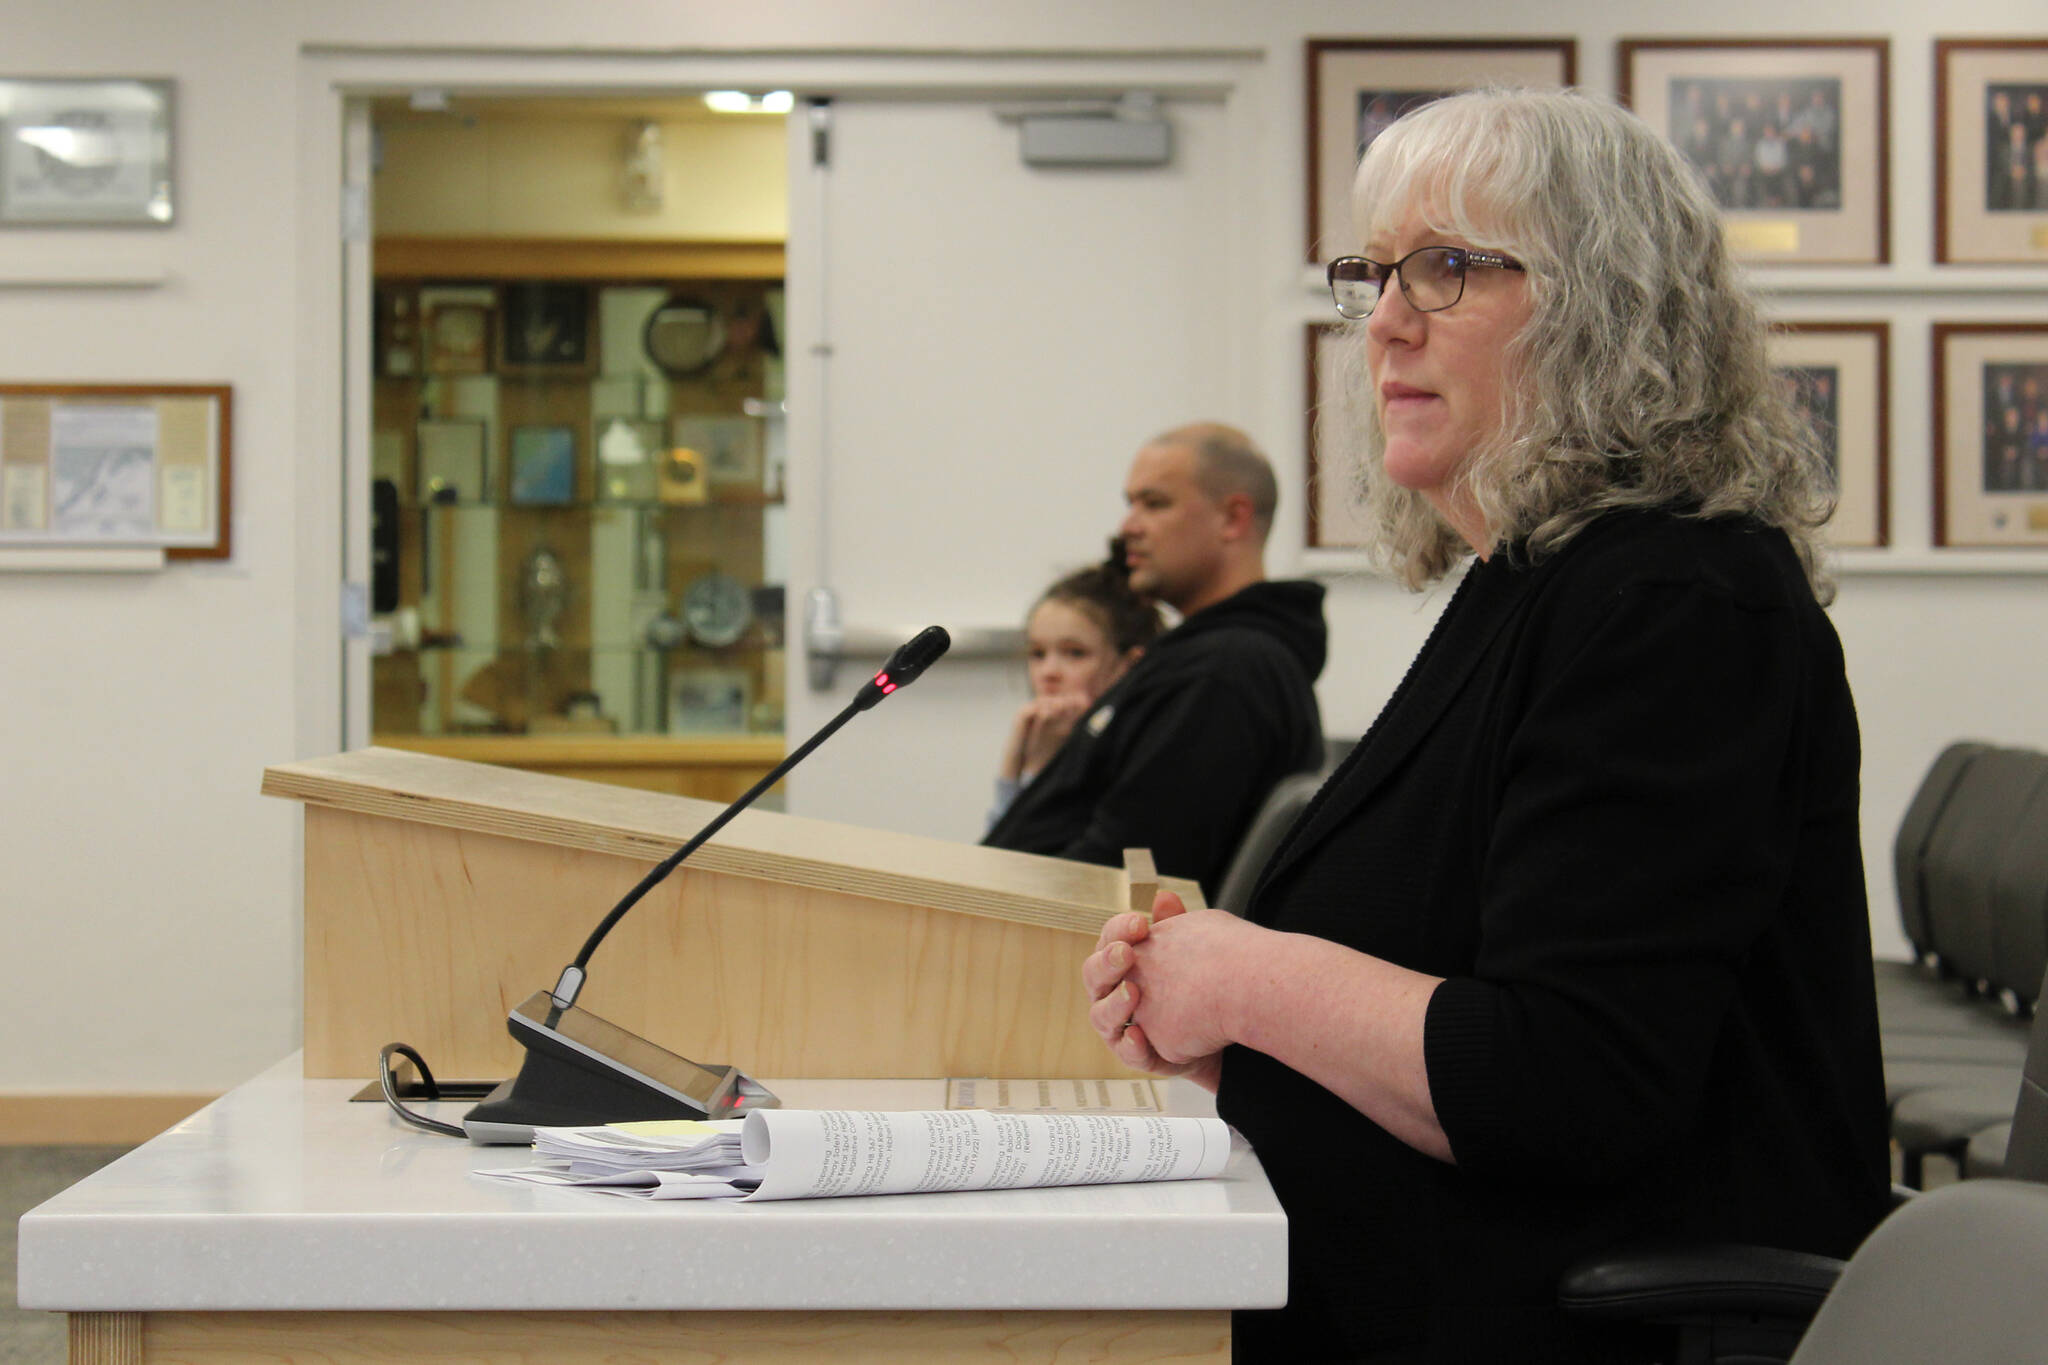 Kenai Peninsula Borough School District Board Member Debbie Cary speaks during a meeting of the Kenai Peninsula Borough Assembly on Tuesday, April 5, 2022, in Soldotna, Alaska. Cary also served on the borough’s reapportionment board. (Ashlyn O’Hara/Peninsula Clarion)